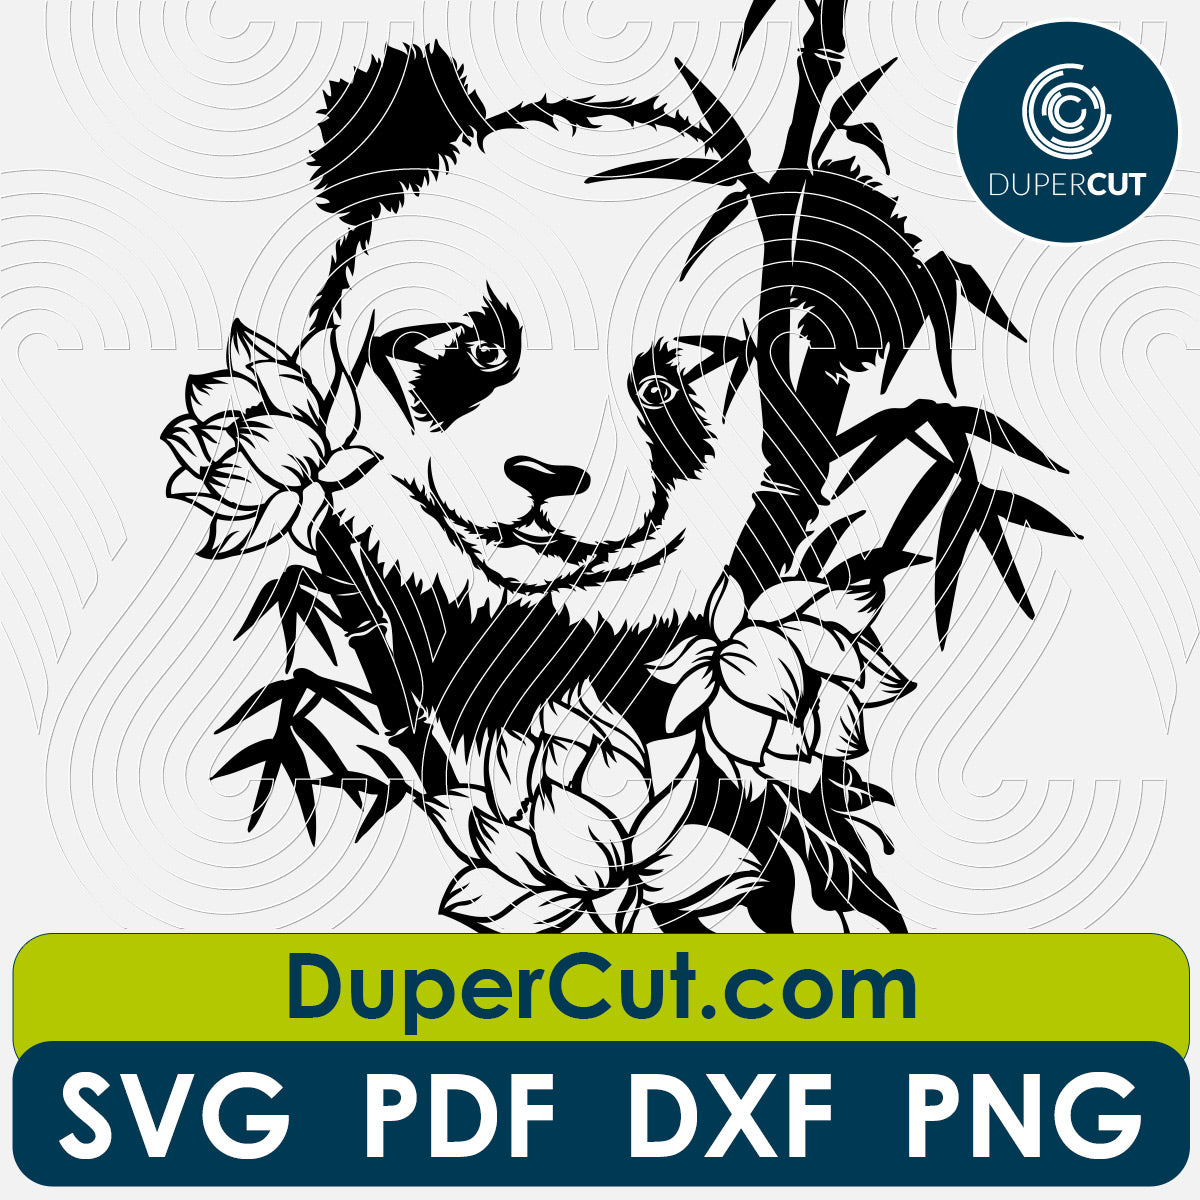 Panda bear with bamboo and Lotus - SVG DXF JPEG files for CNC machines, laser cutting, Cricut, Silhouette Cameo, Glowforge engraving